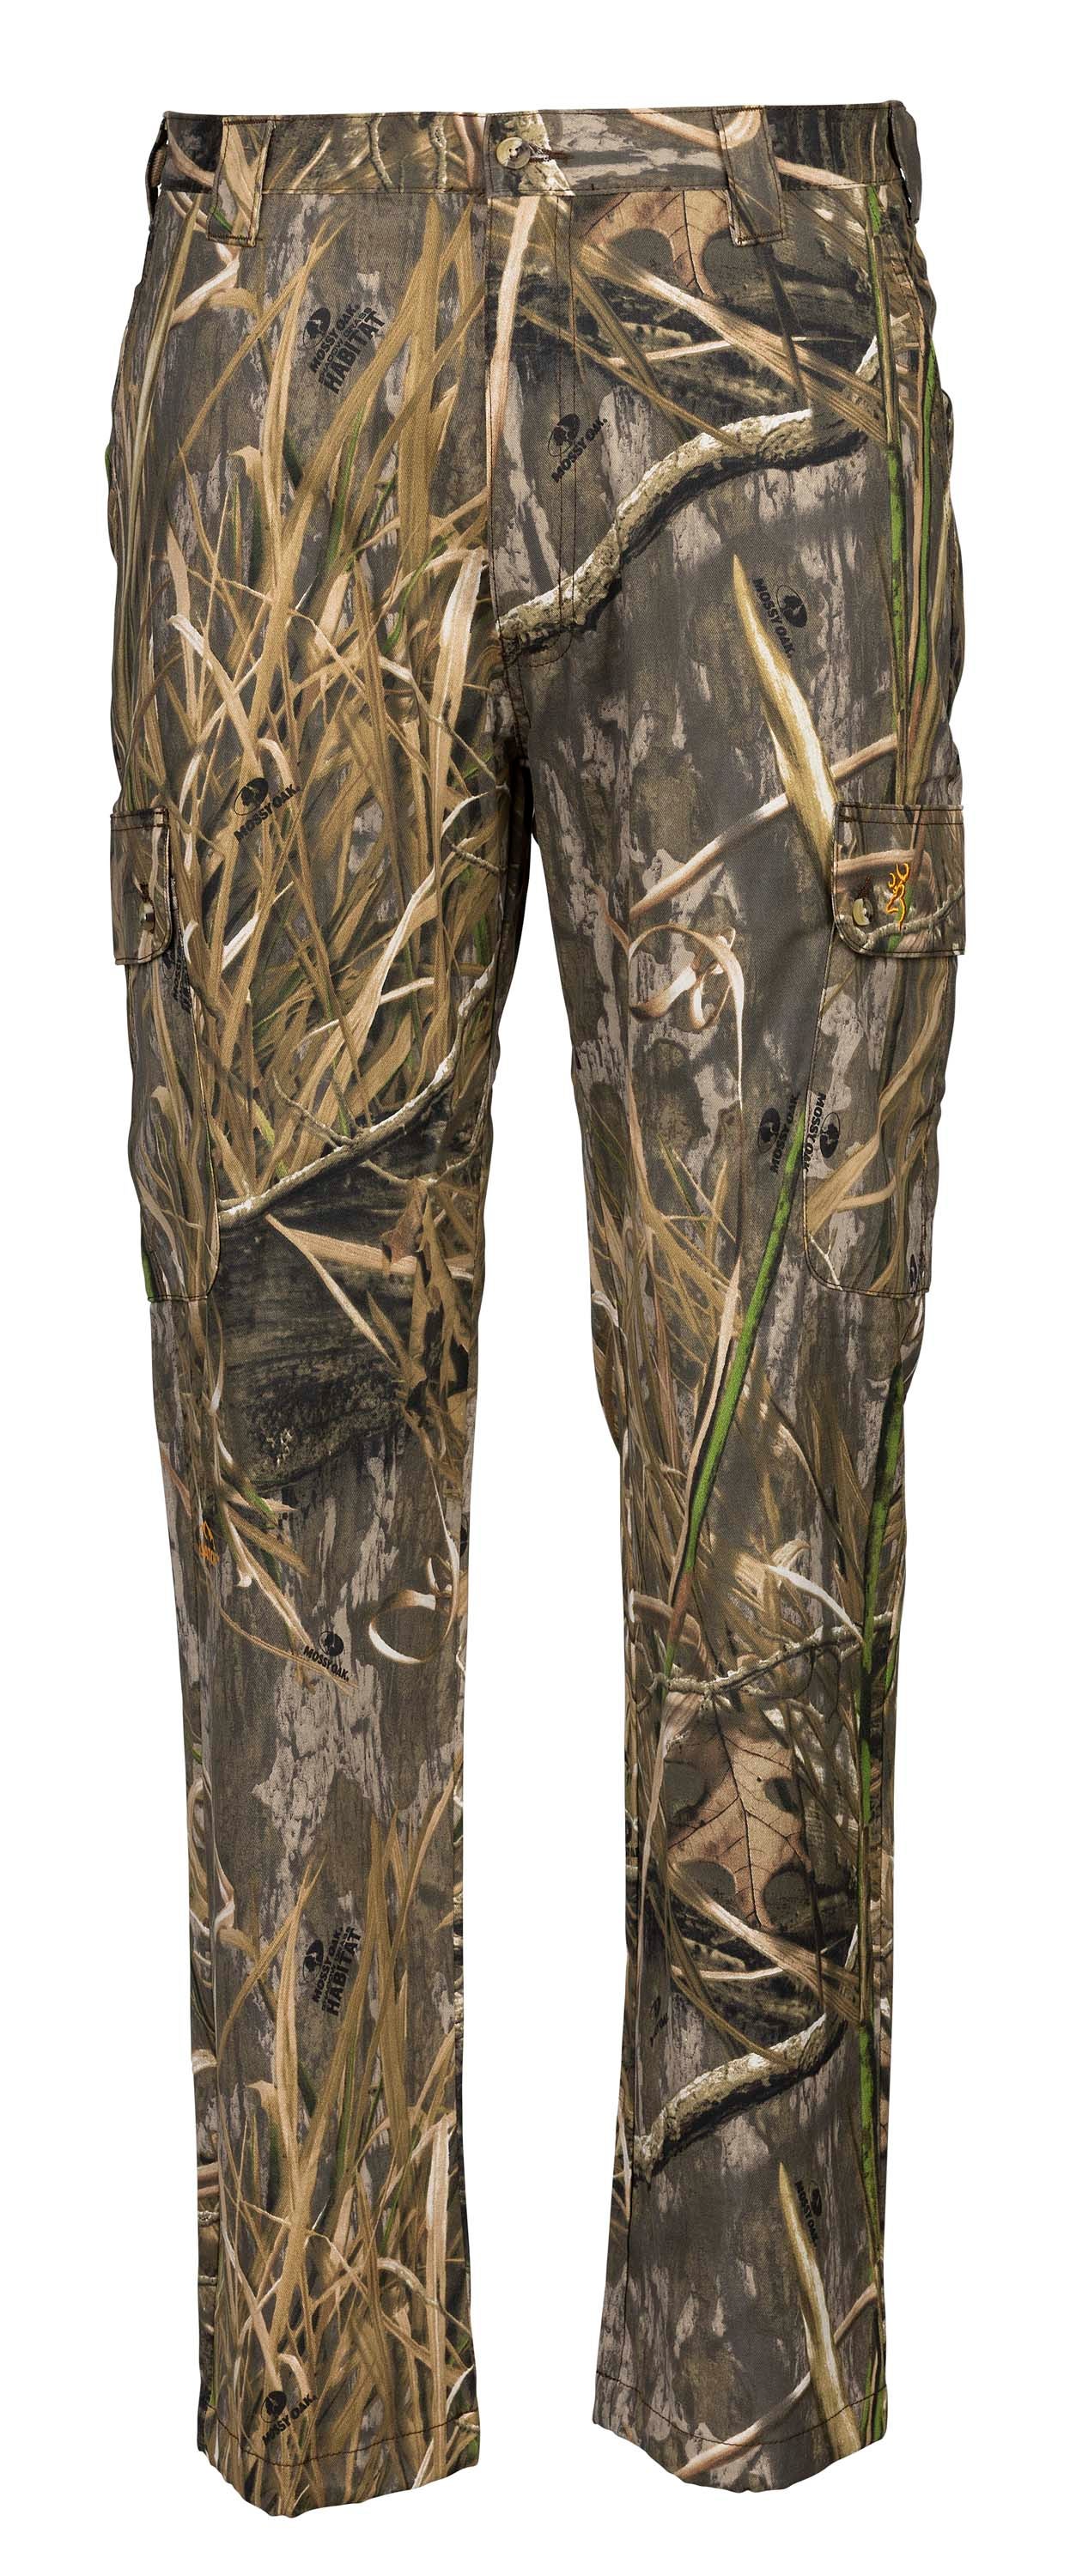 https://www.browning.com/content/dam/browning/product/clothing/2023/wasatch-pant/wasatch-pant-mosgh-30278059-1.jpg